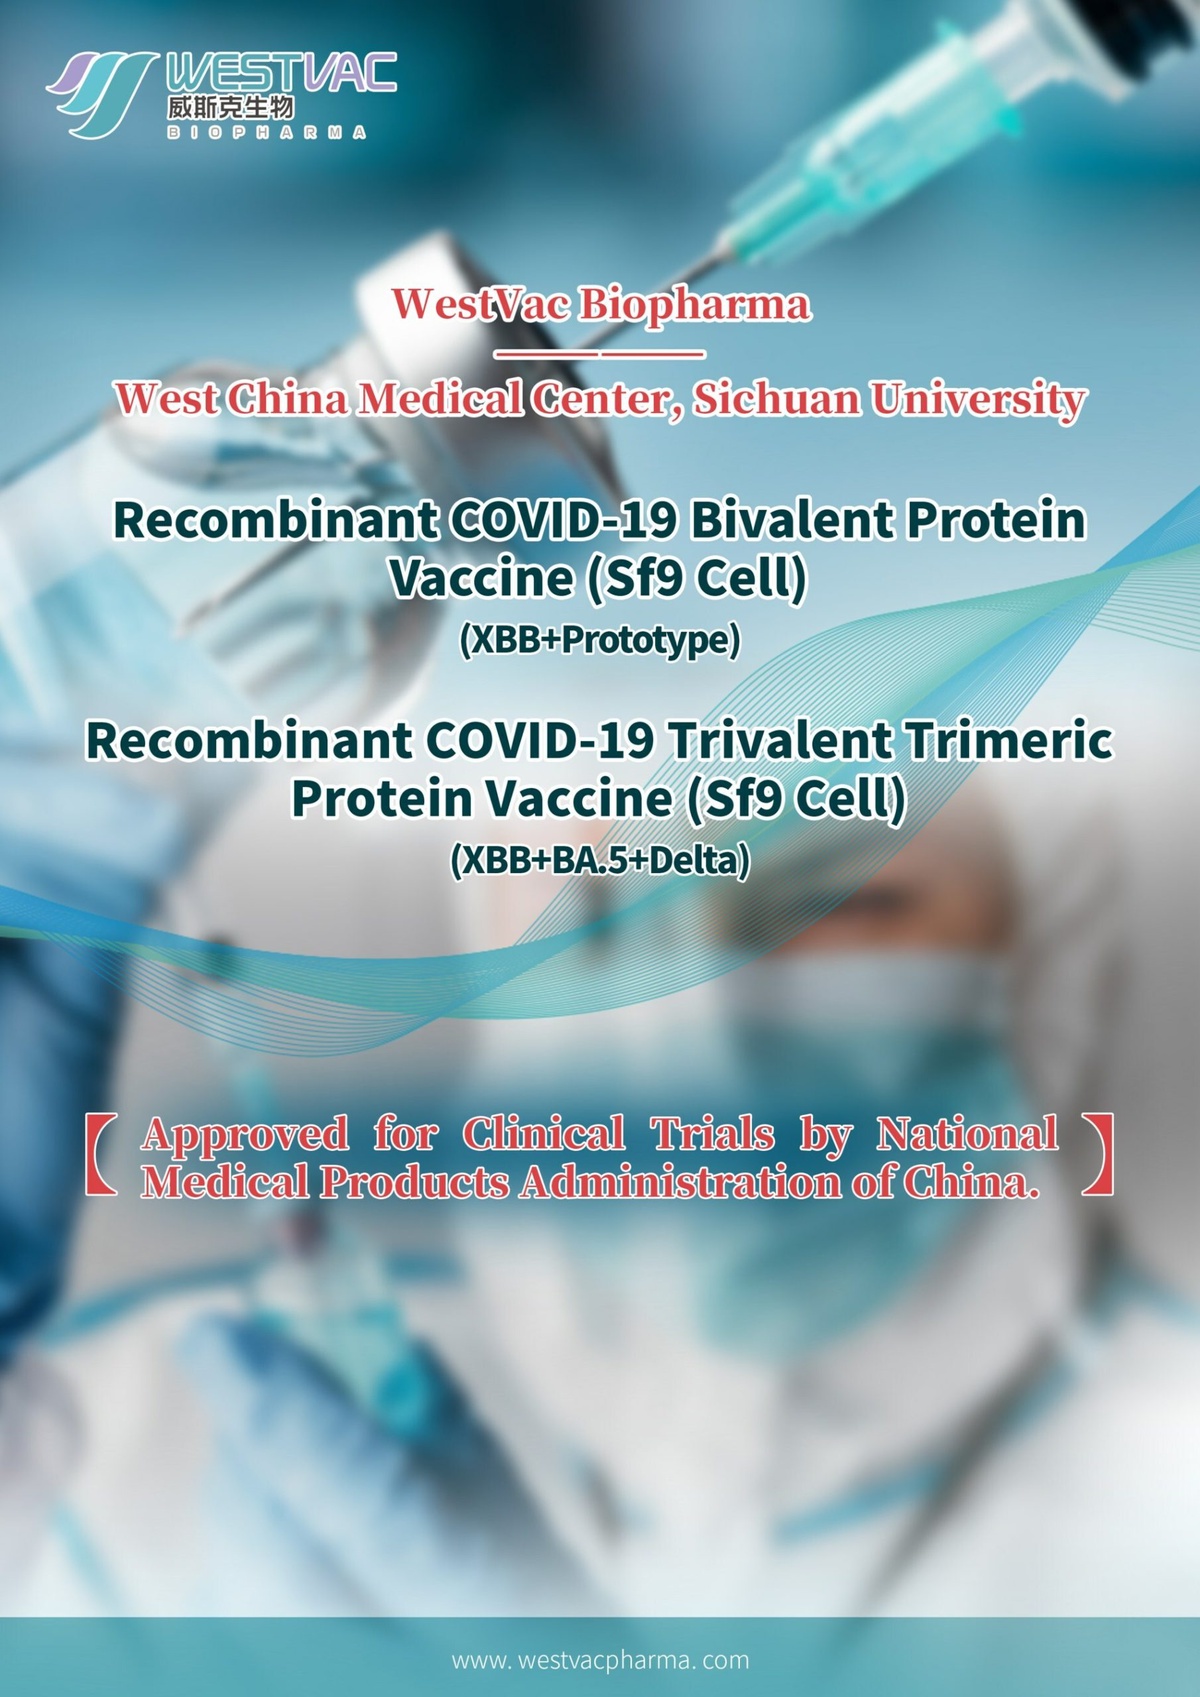 The First of Its Kind in the World: The Recombinant Multivalent COVID-19 Protein Vaccine against XBB Variants by WestVac Biopharma/West China Medical Center, Sichuan University has been Approved for Clinical Trials by The National Medical Products Adminis